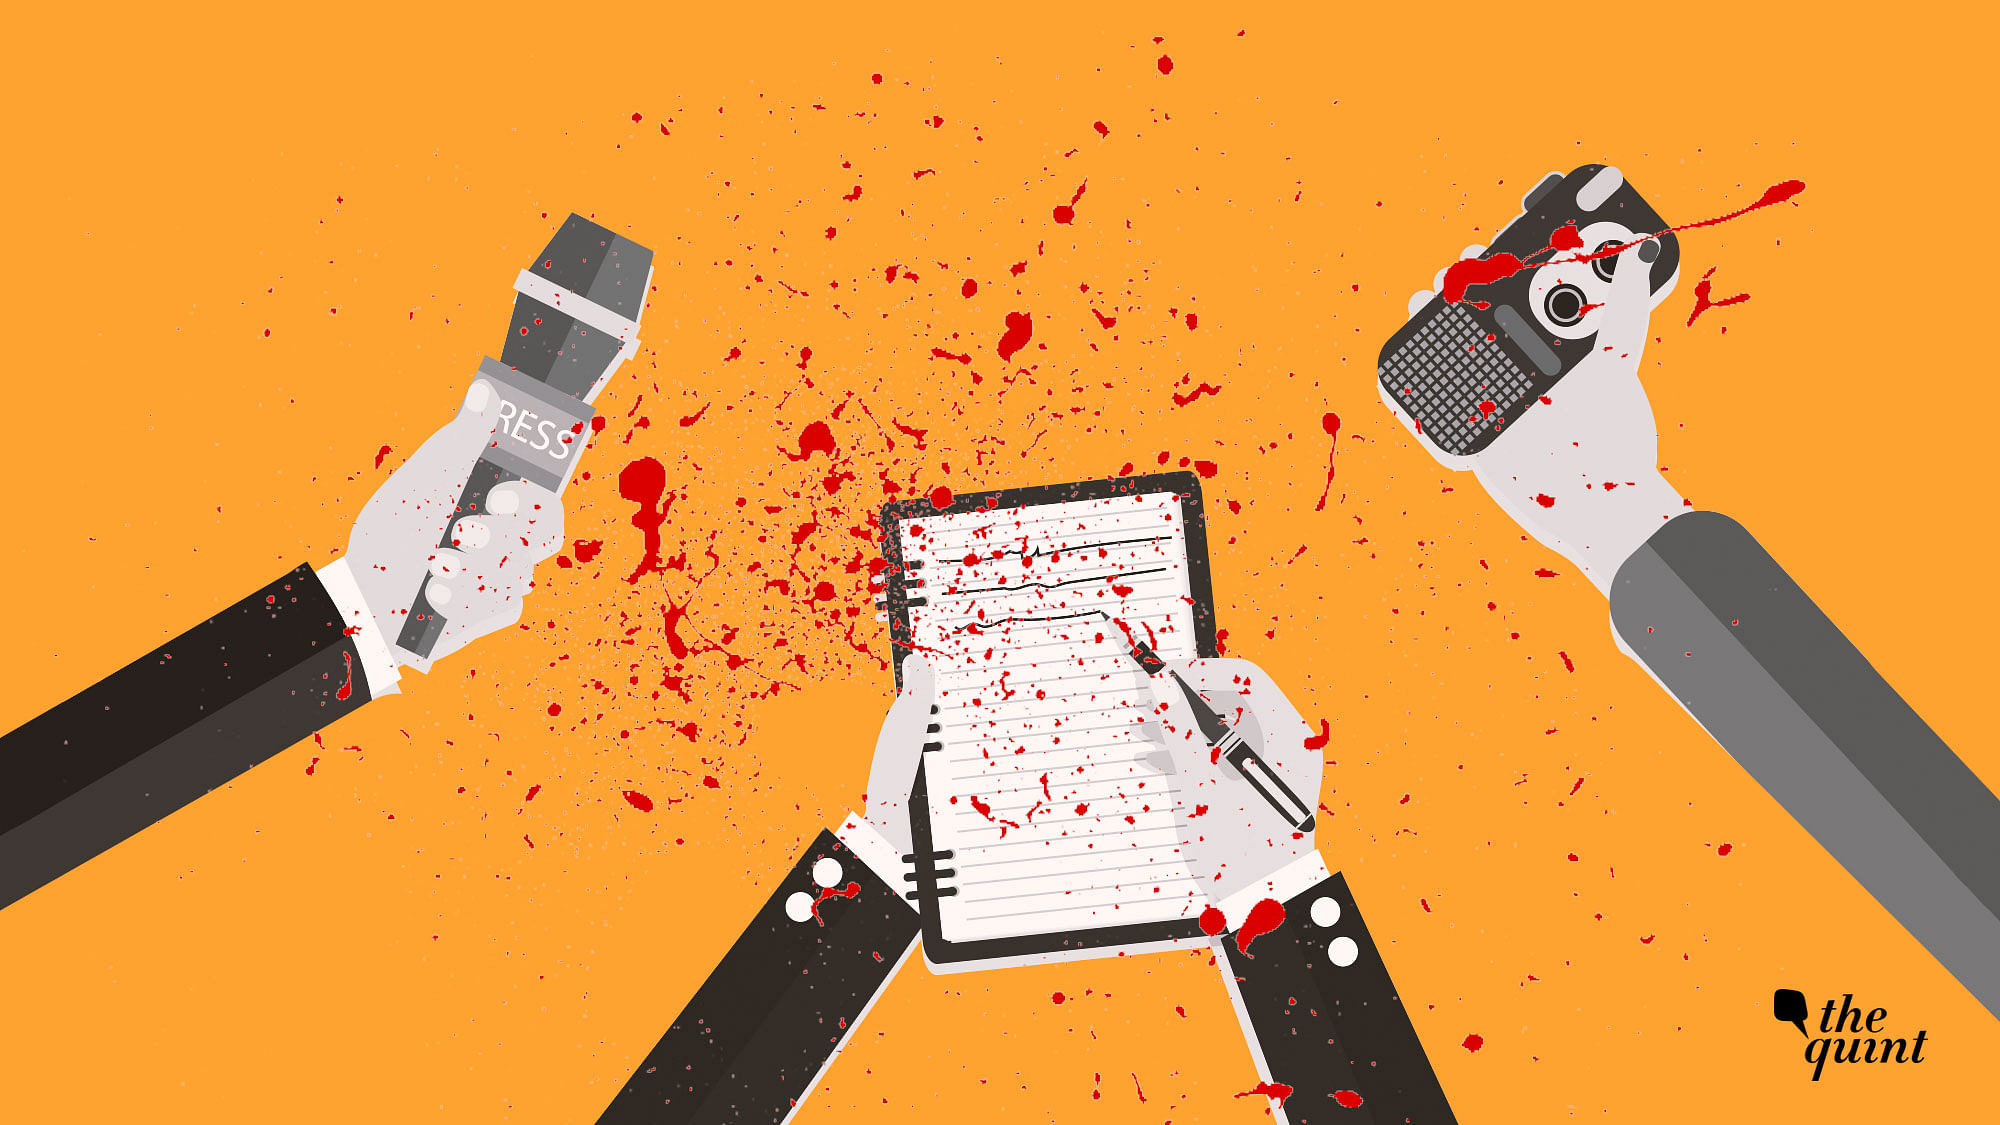 Six journalists were killed in India this year.